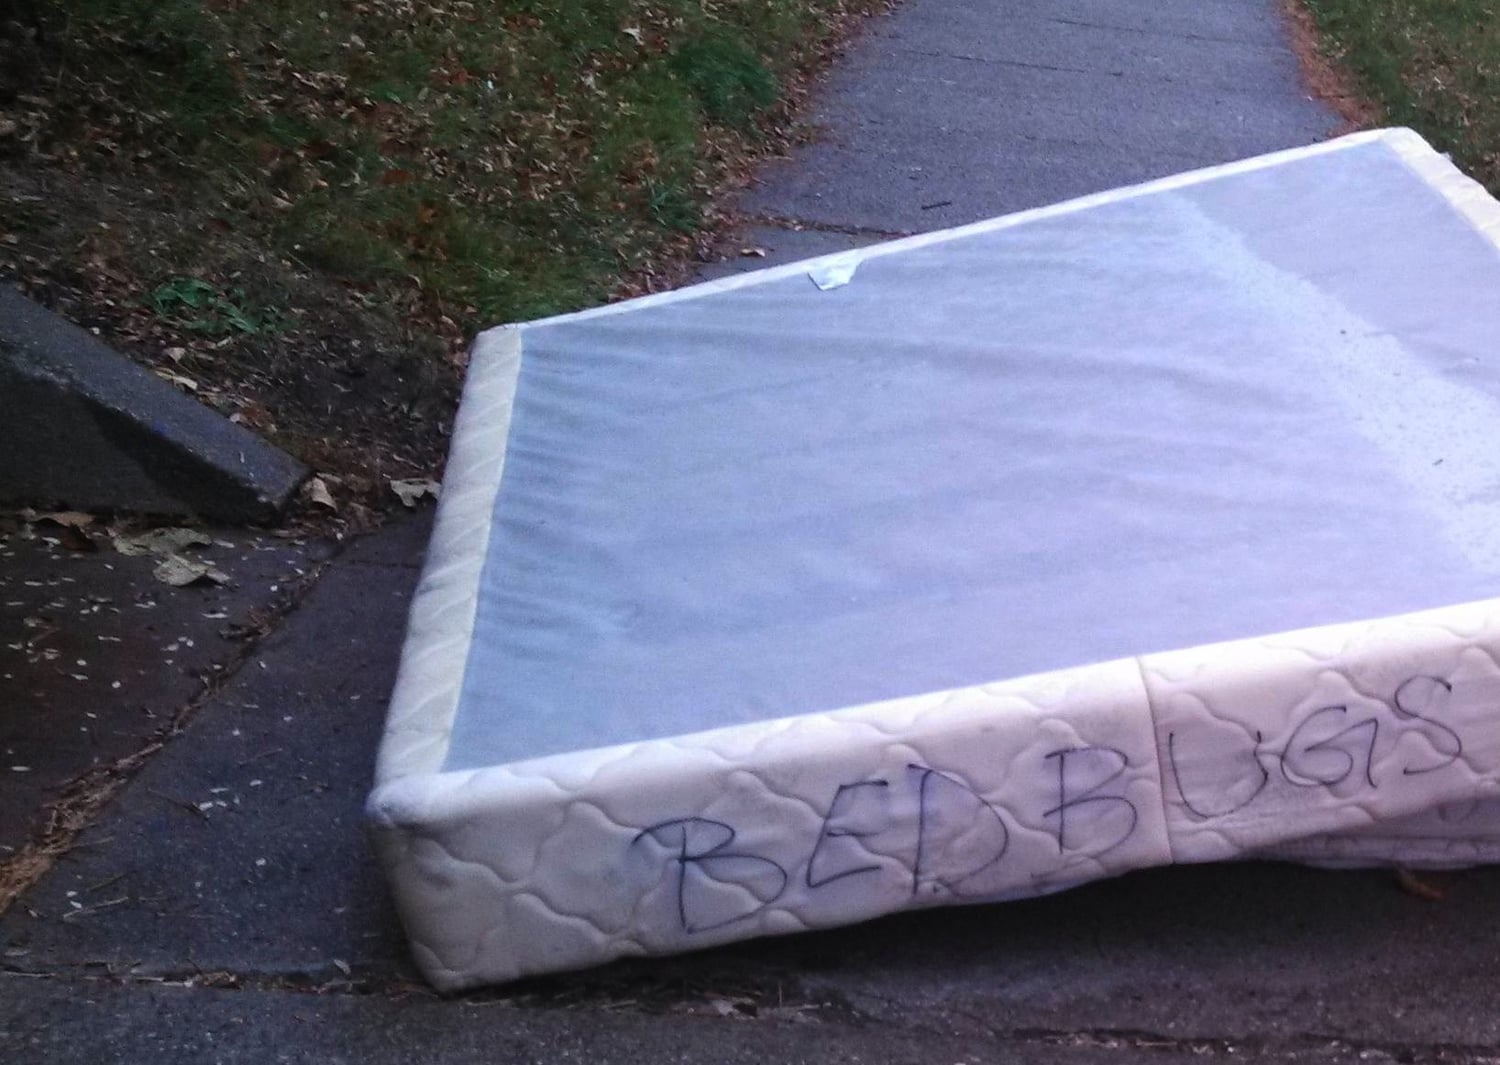 How To Dispose Of A Mattress With Bed Bugs